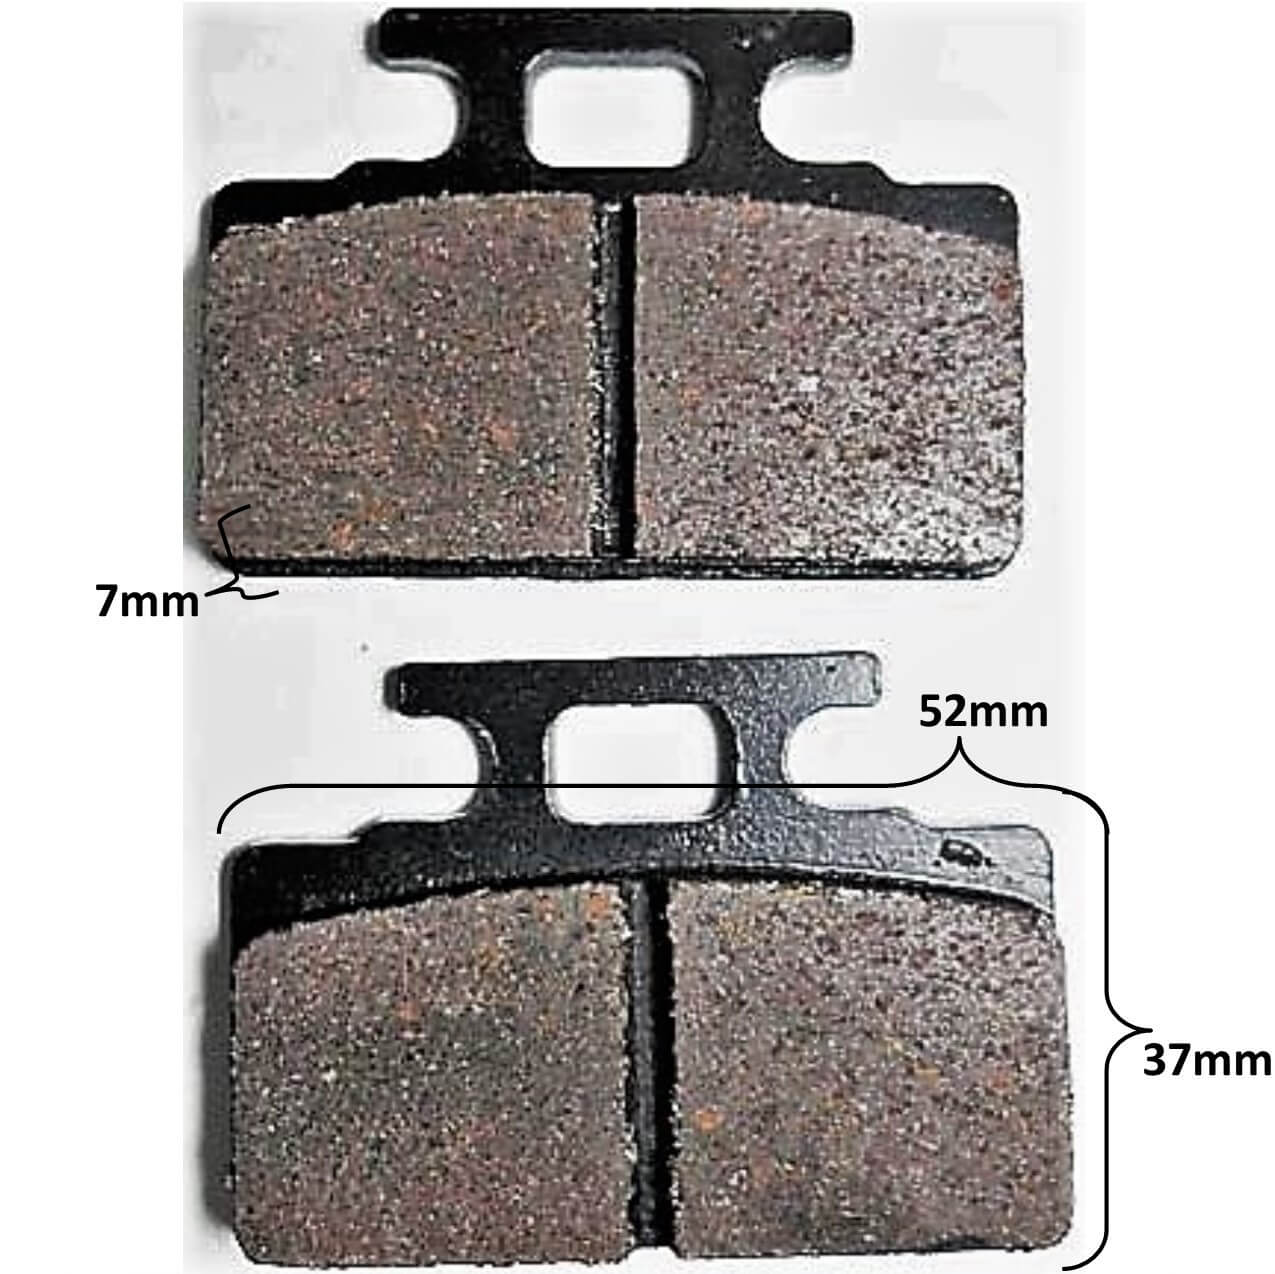 Disc Brake Pads Fits Many Chinese Scooters 52x37x7 - Click Image to Close